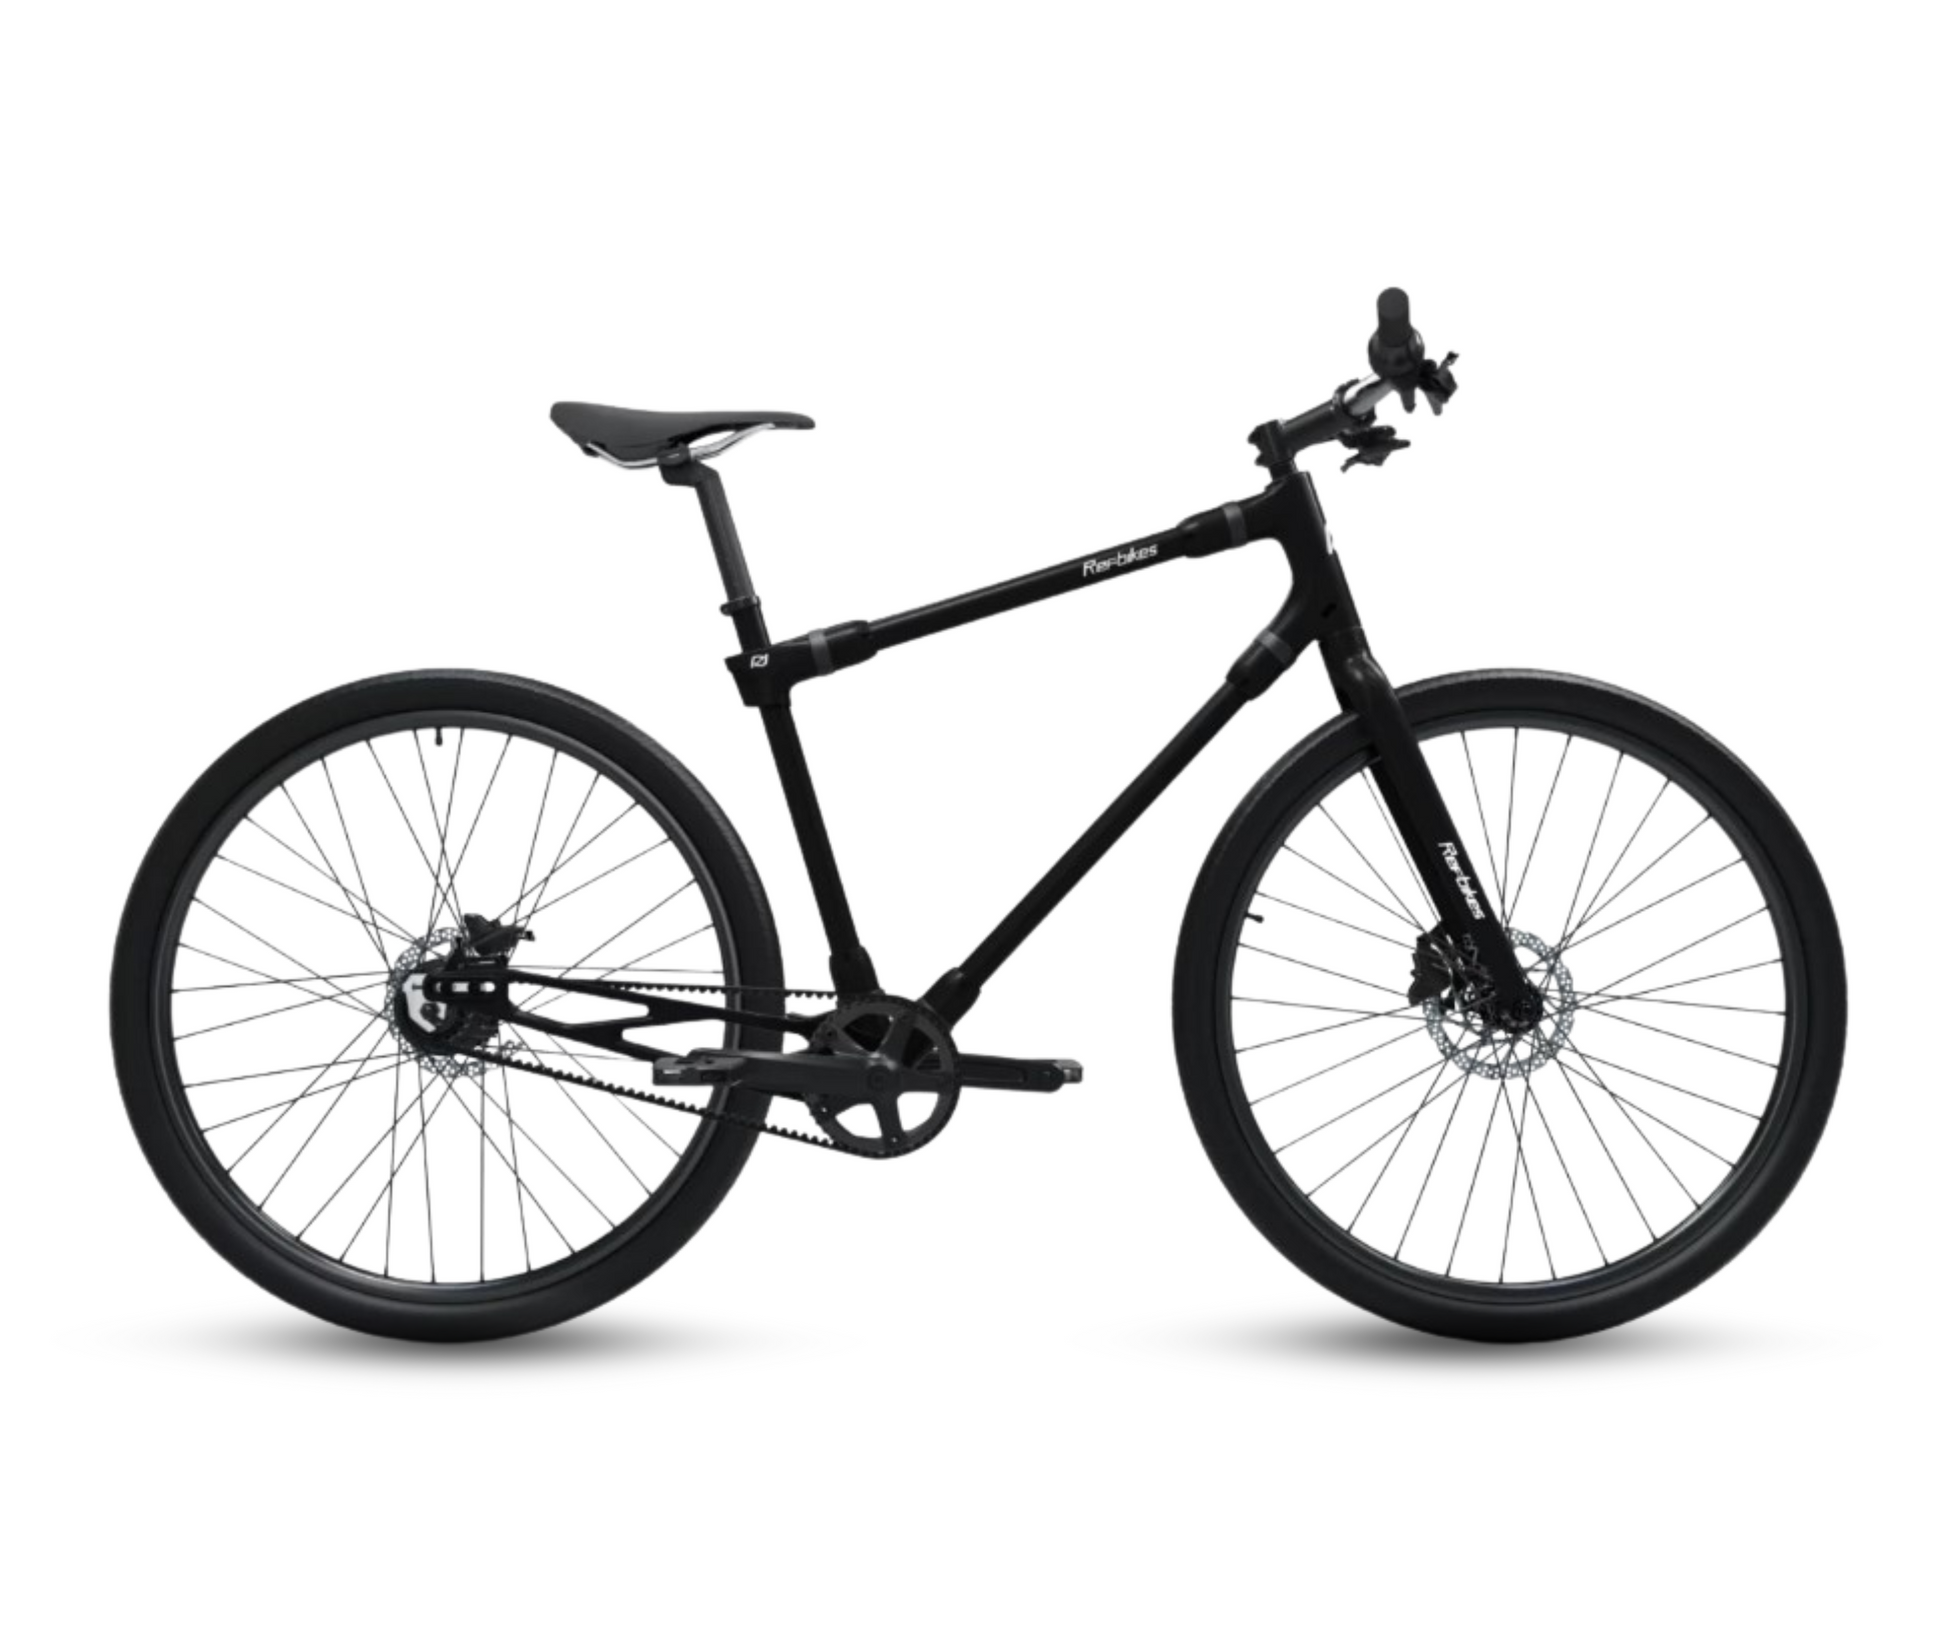 Sleek black Ref Essential bike isolated on white, highlighting its minimalist design and clean lines for city commuting.